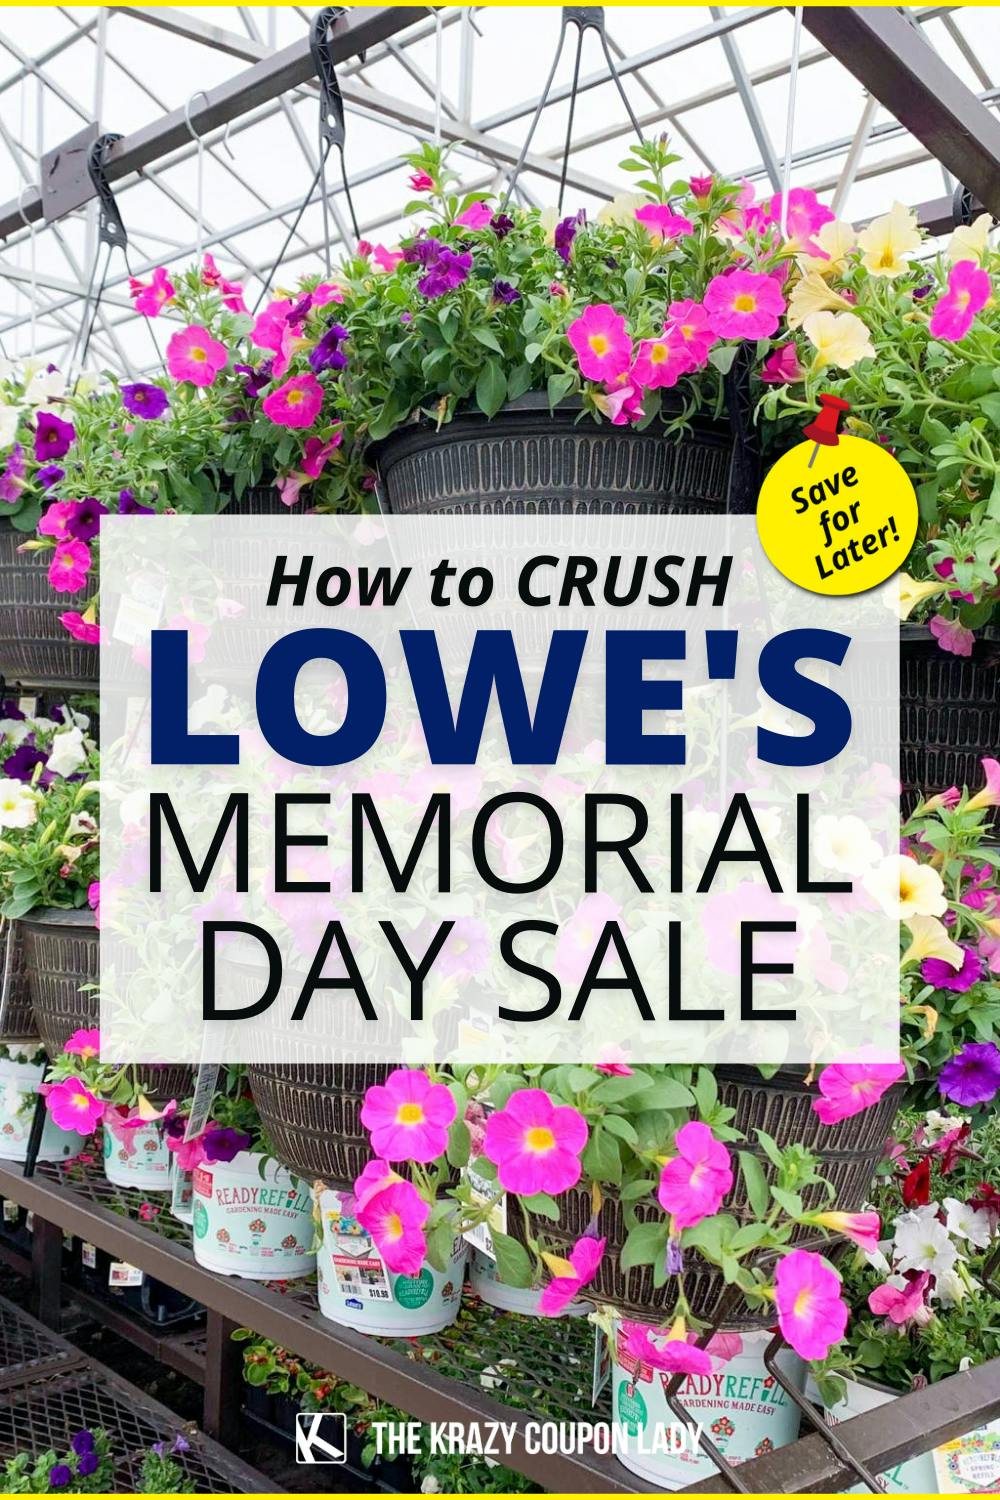 Lowe's Memorial Day Sale Dates, Strategies, and Stock-Up Prices